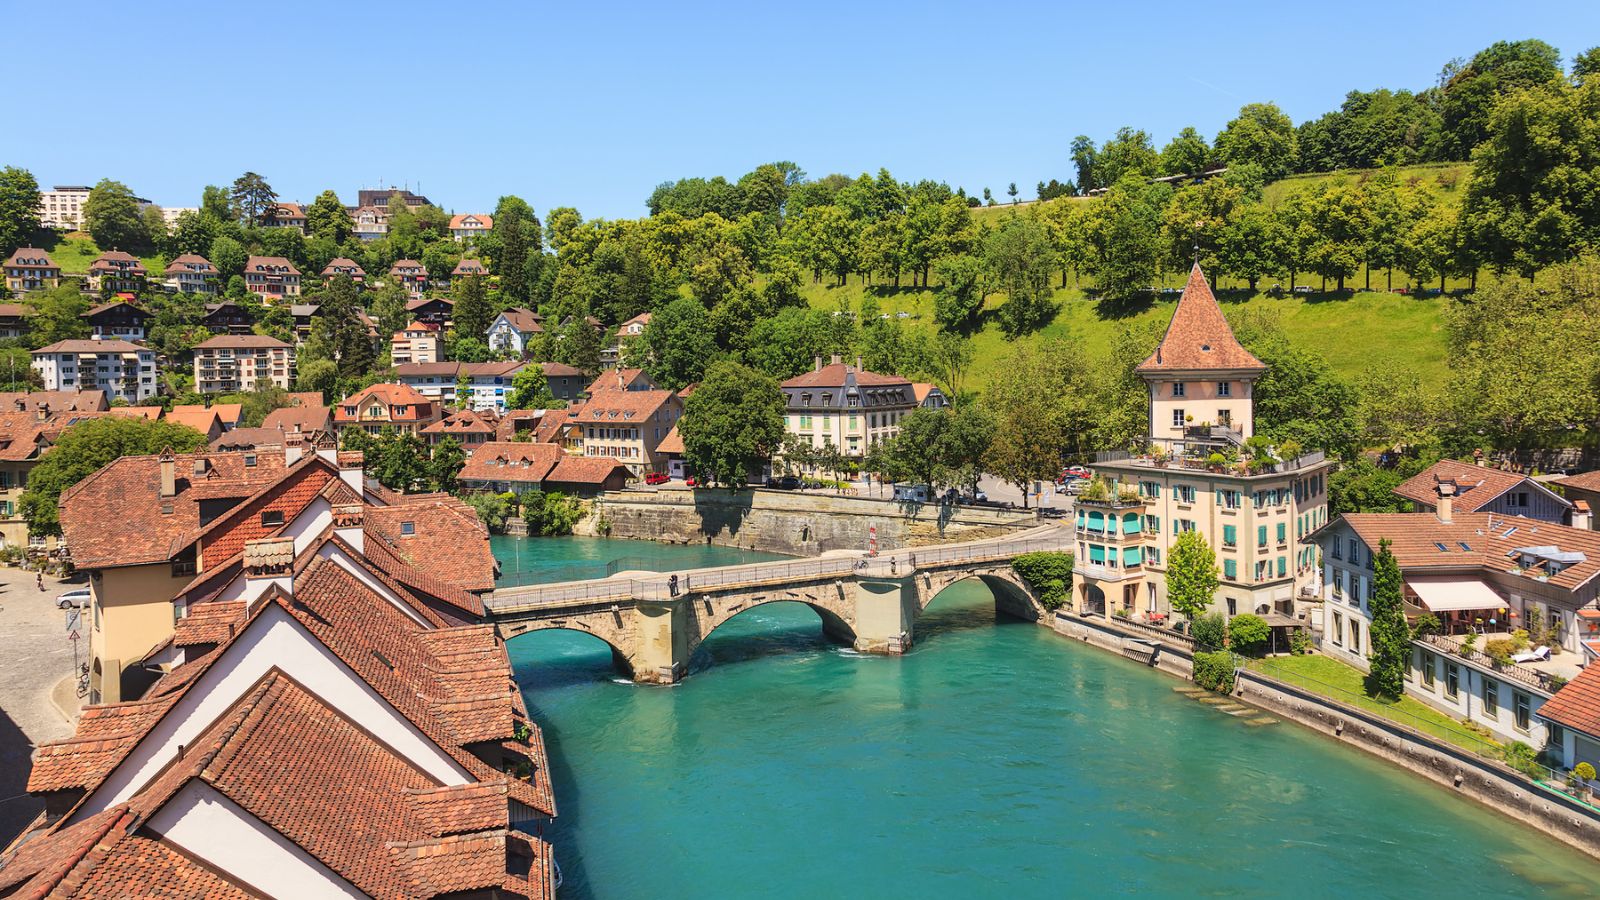 <p>The capital of Switzerland is one of the most beautiful cities in the world, let alone Europe. It’s also tiny! Around 134,000 people live in Bern, which pales in comparison to somewhere like London, which has a population of almost <em>nine million</em>.</p><p>The landscapes around the city are hard to beat. Bern itself, though, is the biggest draw. Its medieval Old Town, a UNESCO World Heritage Site, is situated on a long, narrow hill encircled by the Aare River.</p>